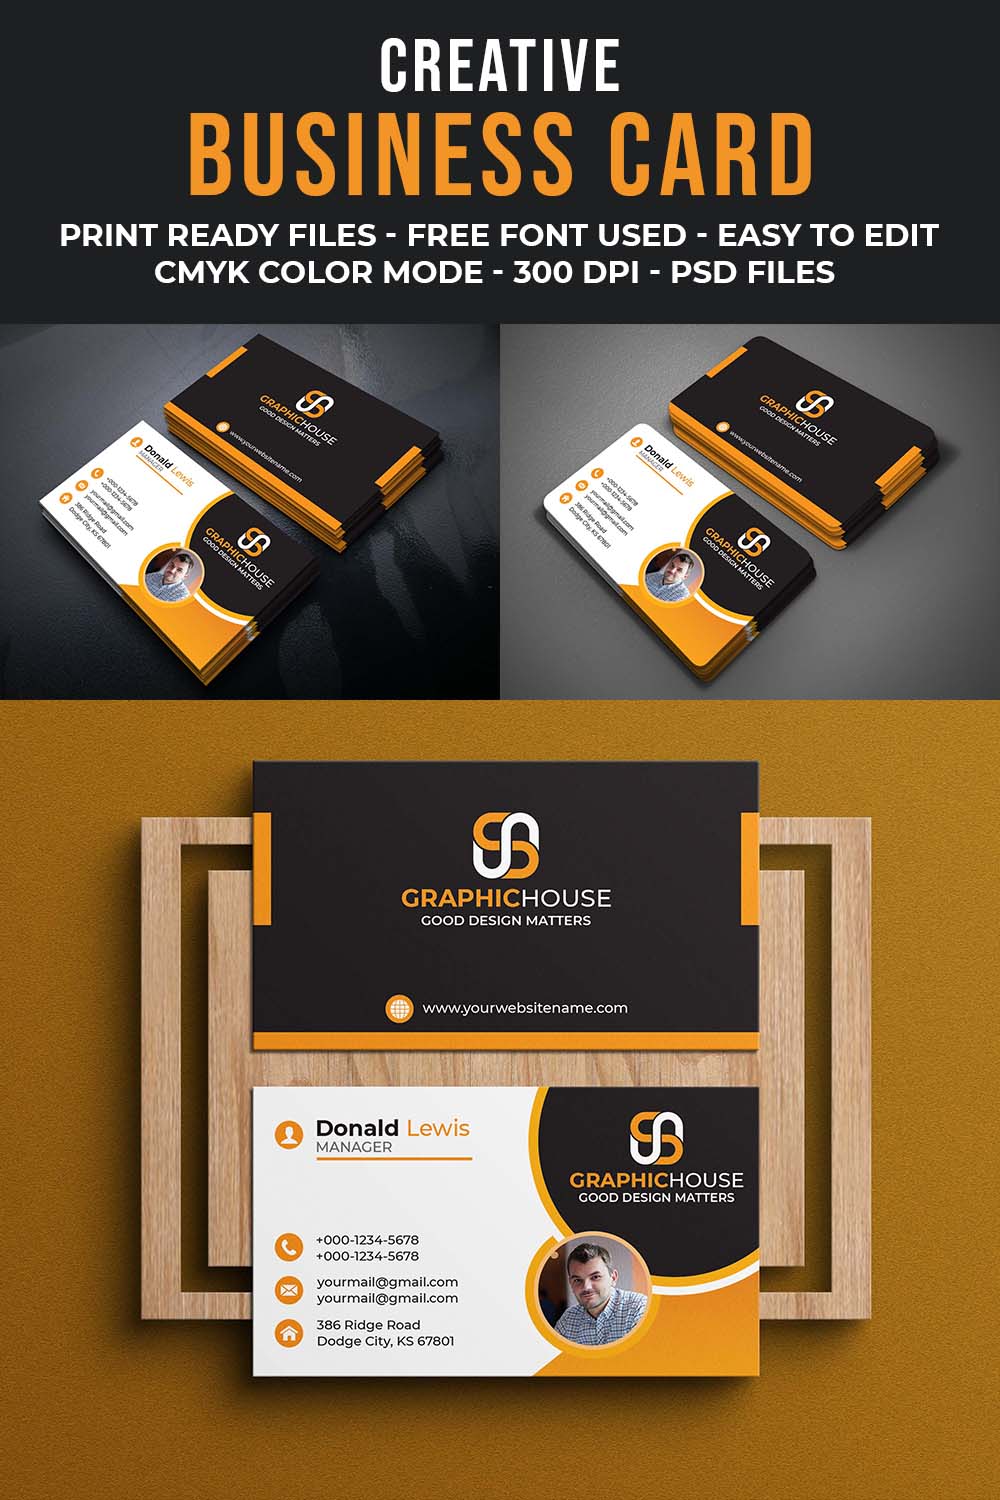 Creative Professional Business Card Template Pinterest Image.